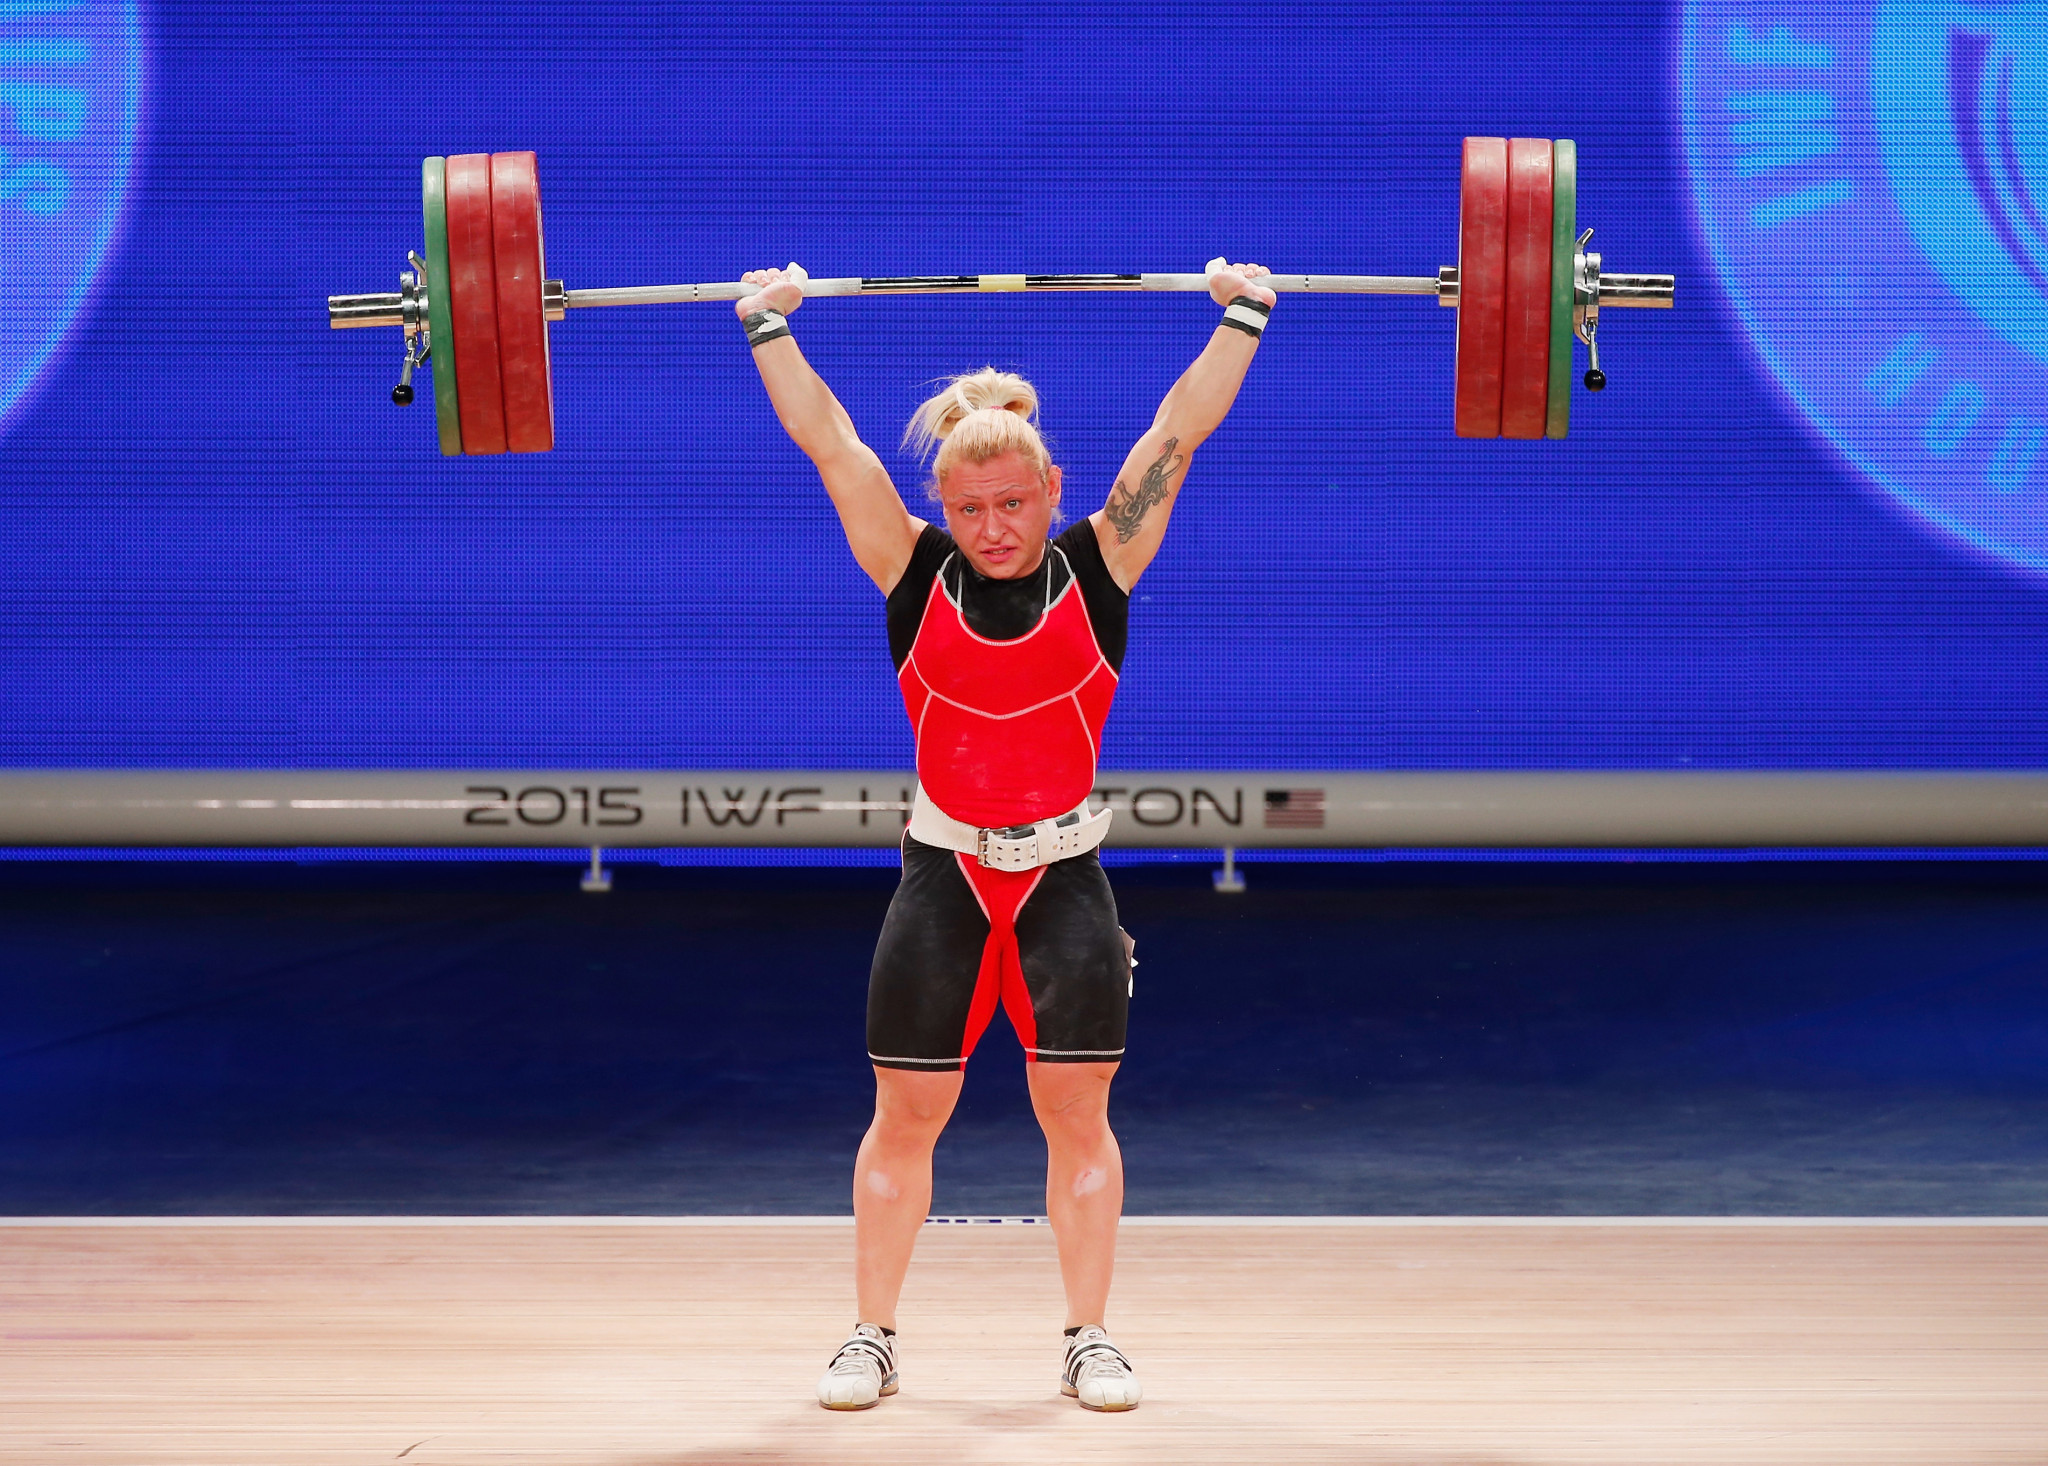 Boyanka Kostova of Azerbaijan won a closely fought women's 59 kilogram title on day three of the European Weightlifting Championships ©Getty Images